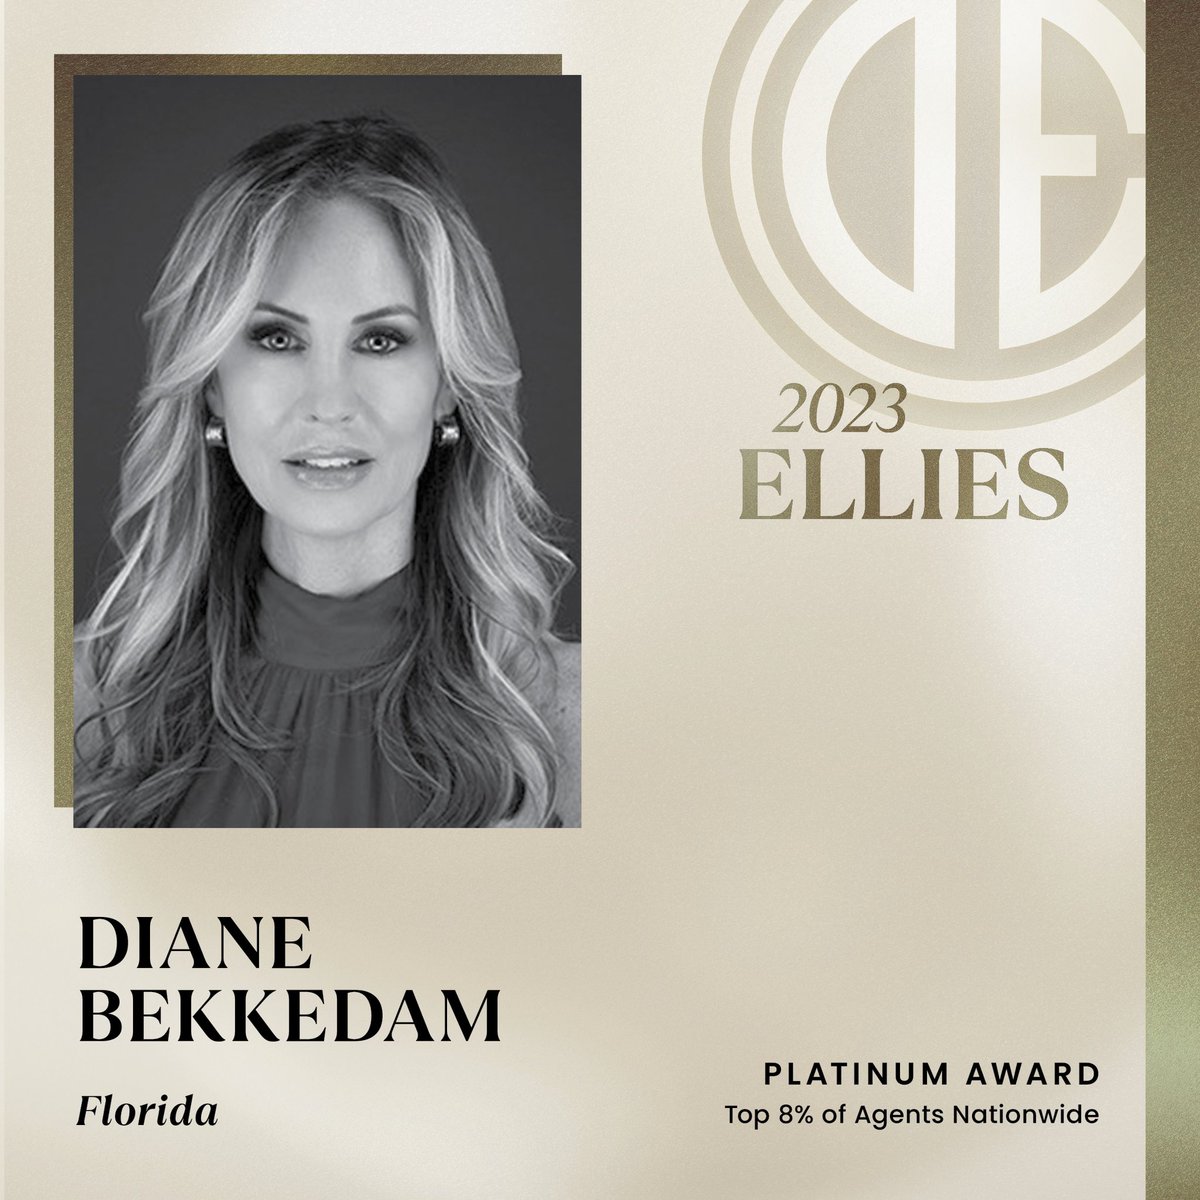 I am thrilled to share that I have been recognized at #TheEllies2023, celebrating @DouglasElliman’s top agents.  Thank you to my clients & Referal partners.This accomplishment would not be possible without you. #EllimanAgents #DouglasElliman #TheNextMoveIsYours